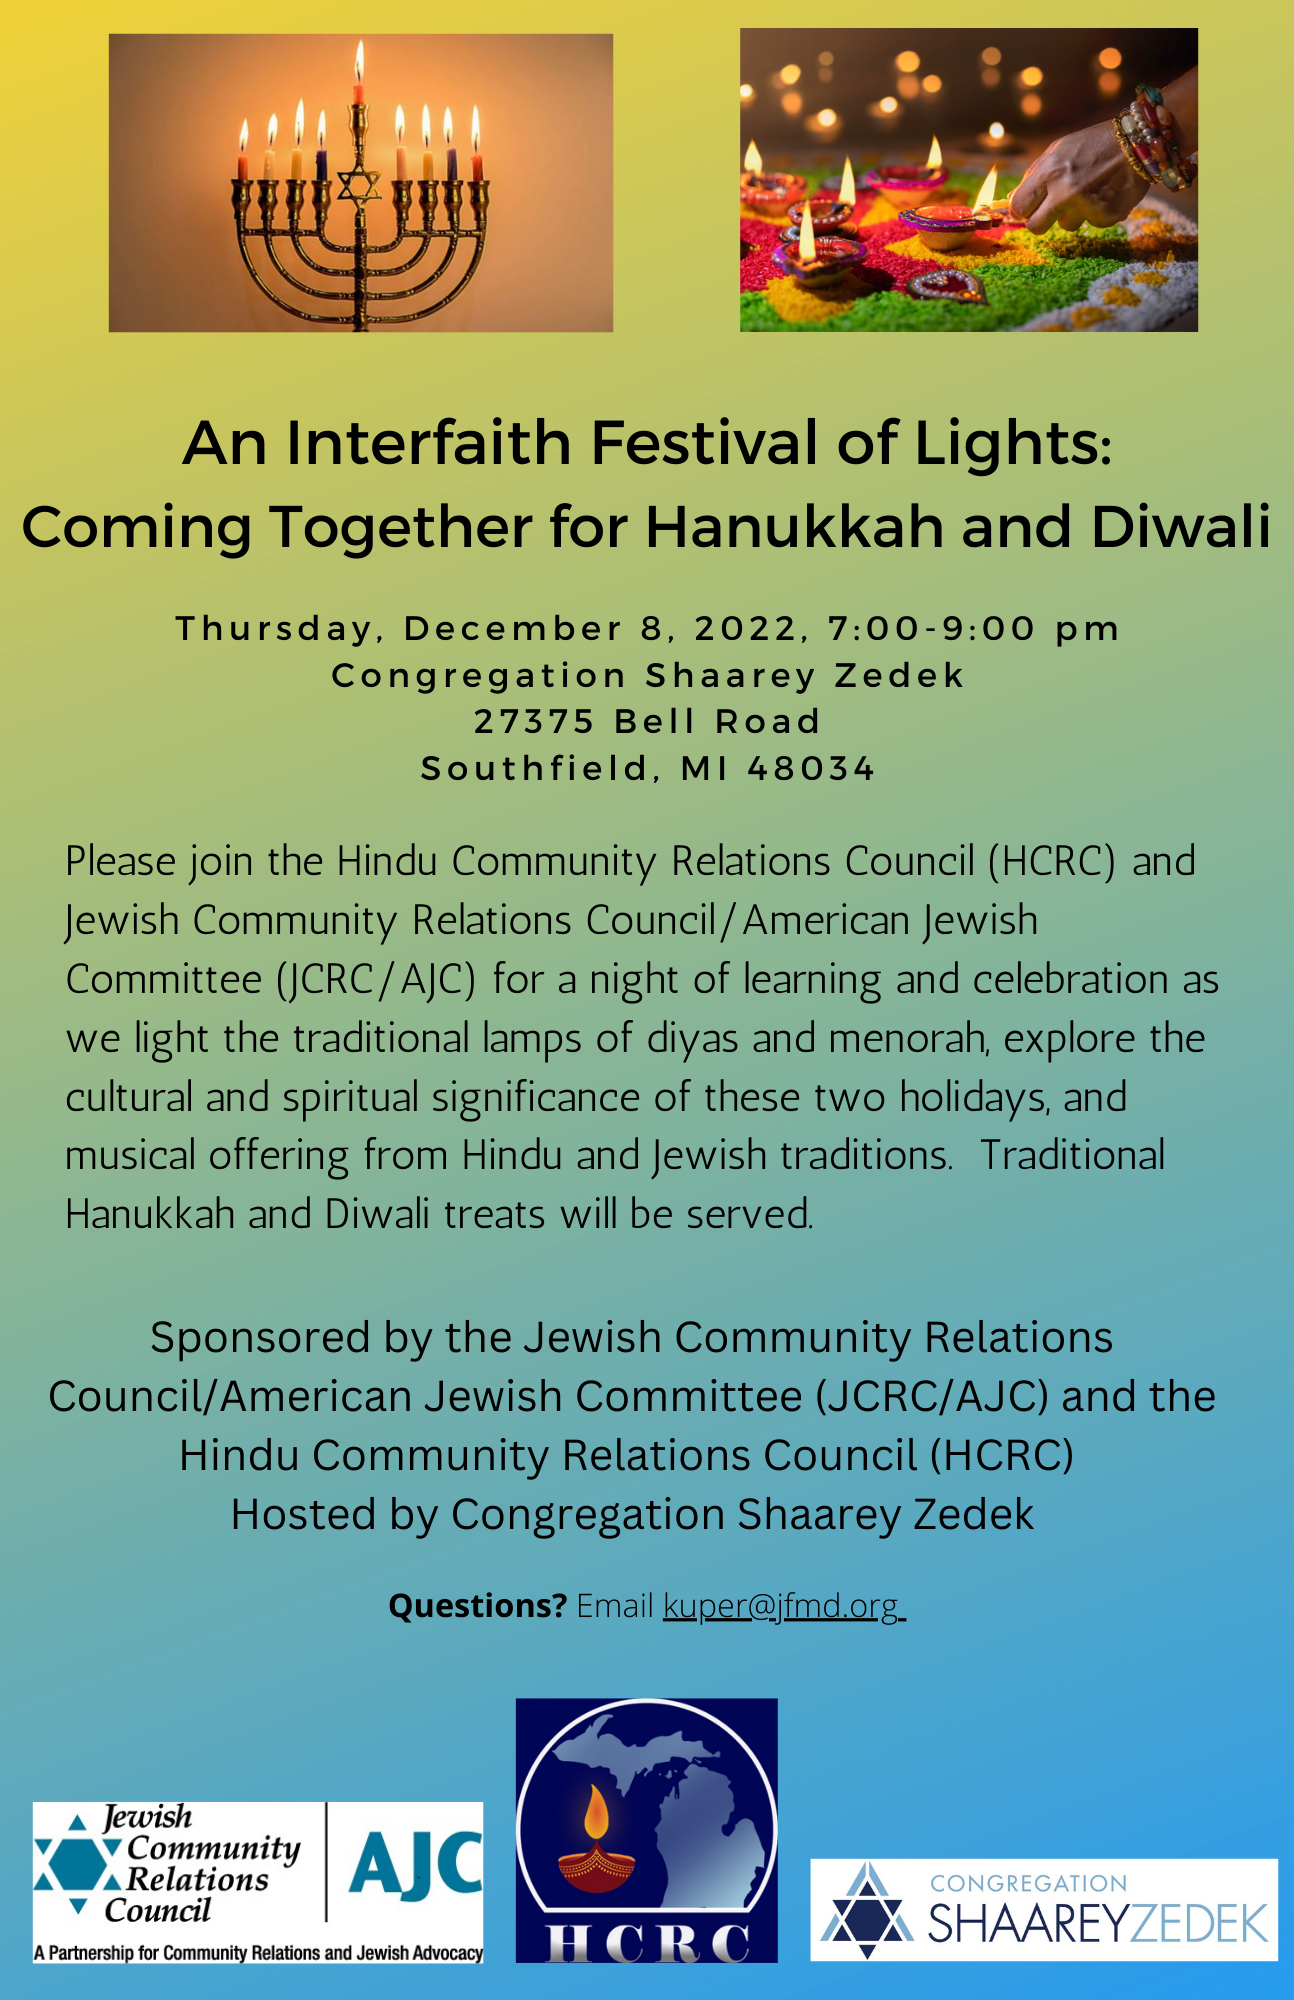 An Interfaith Festival of Lights: Coming Together for Chanukah and Diwali